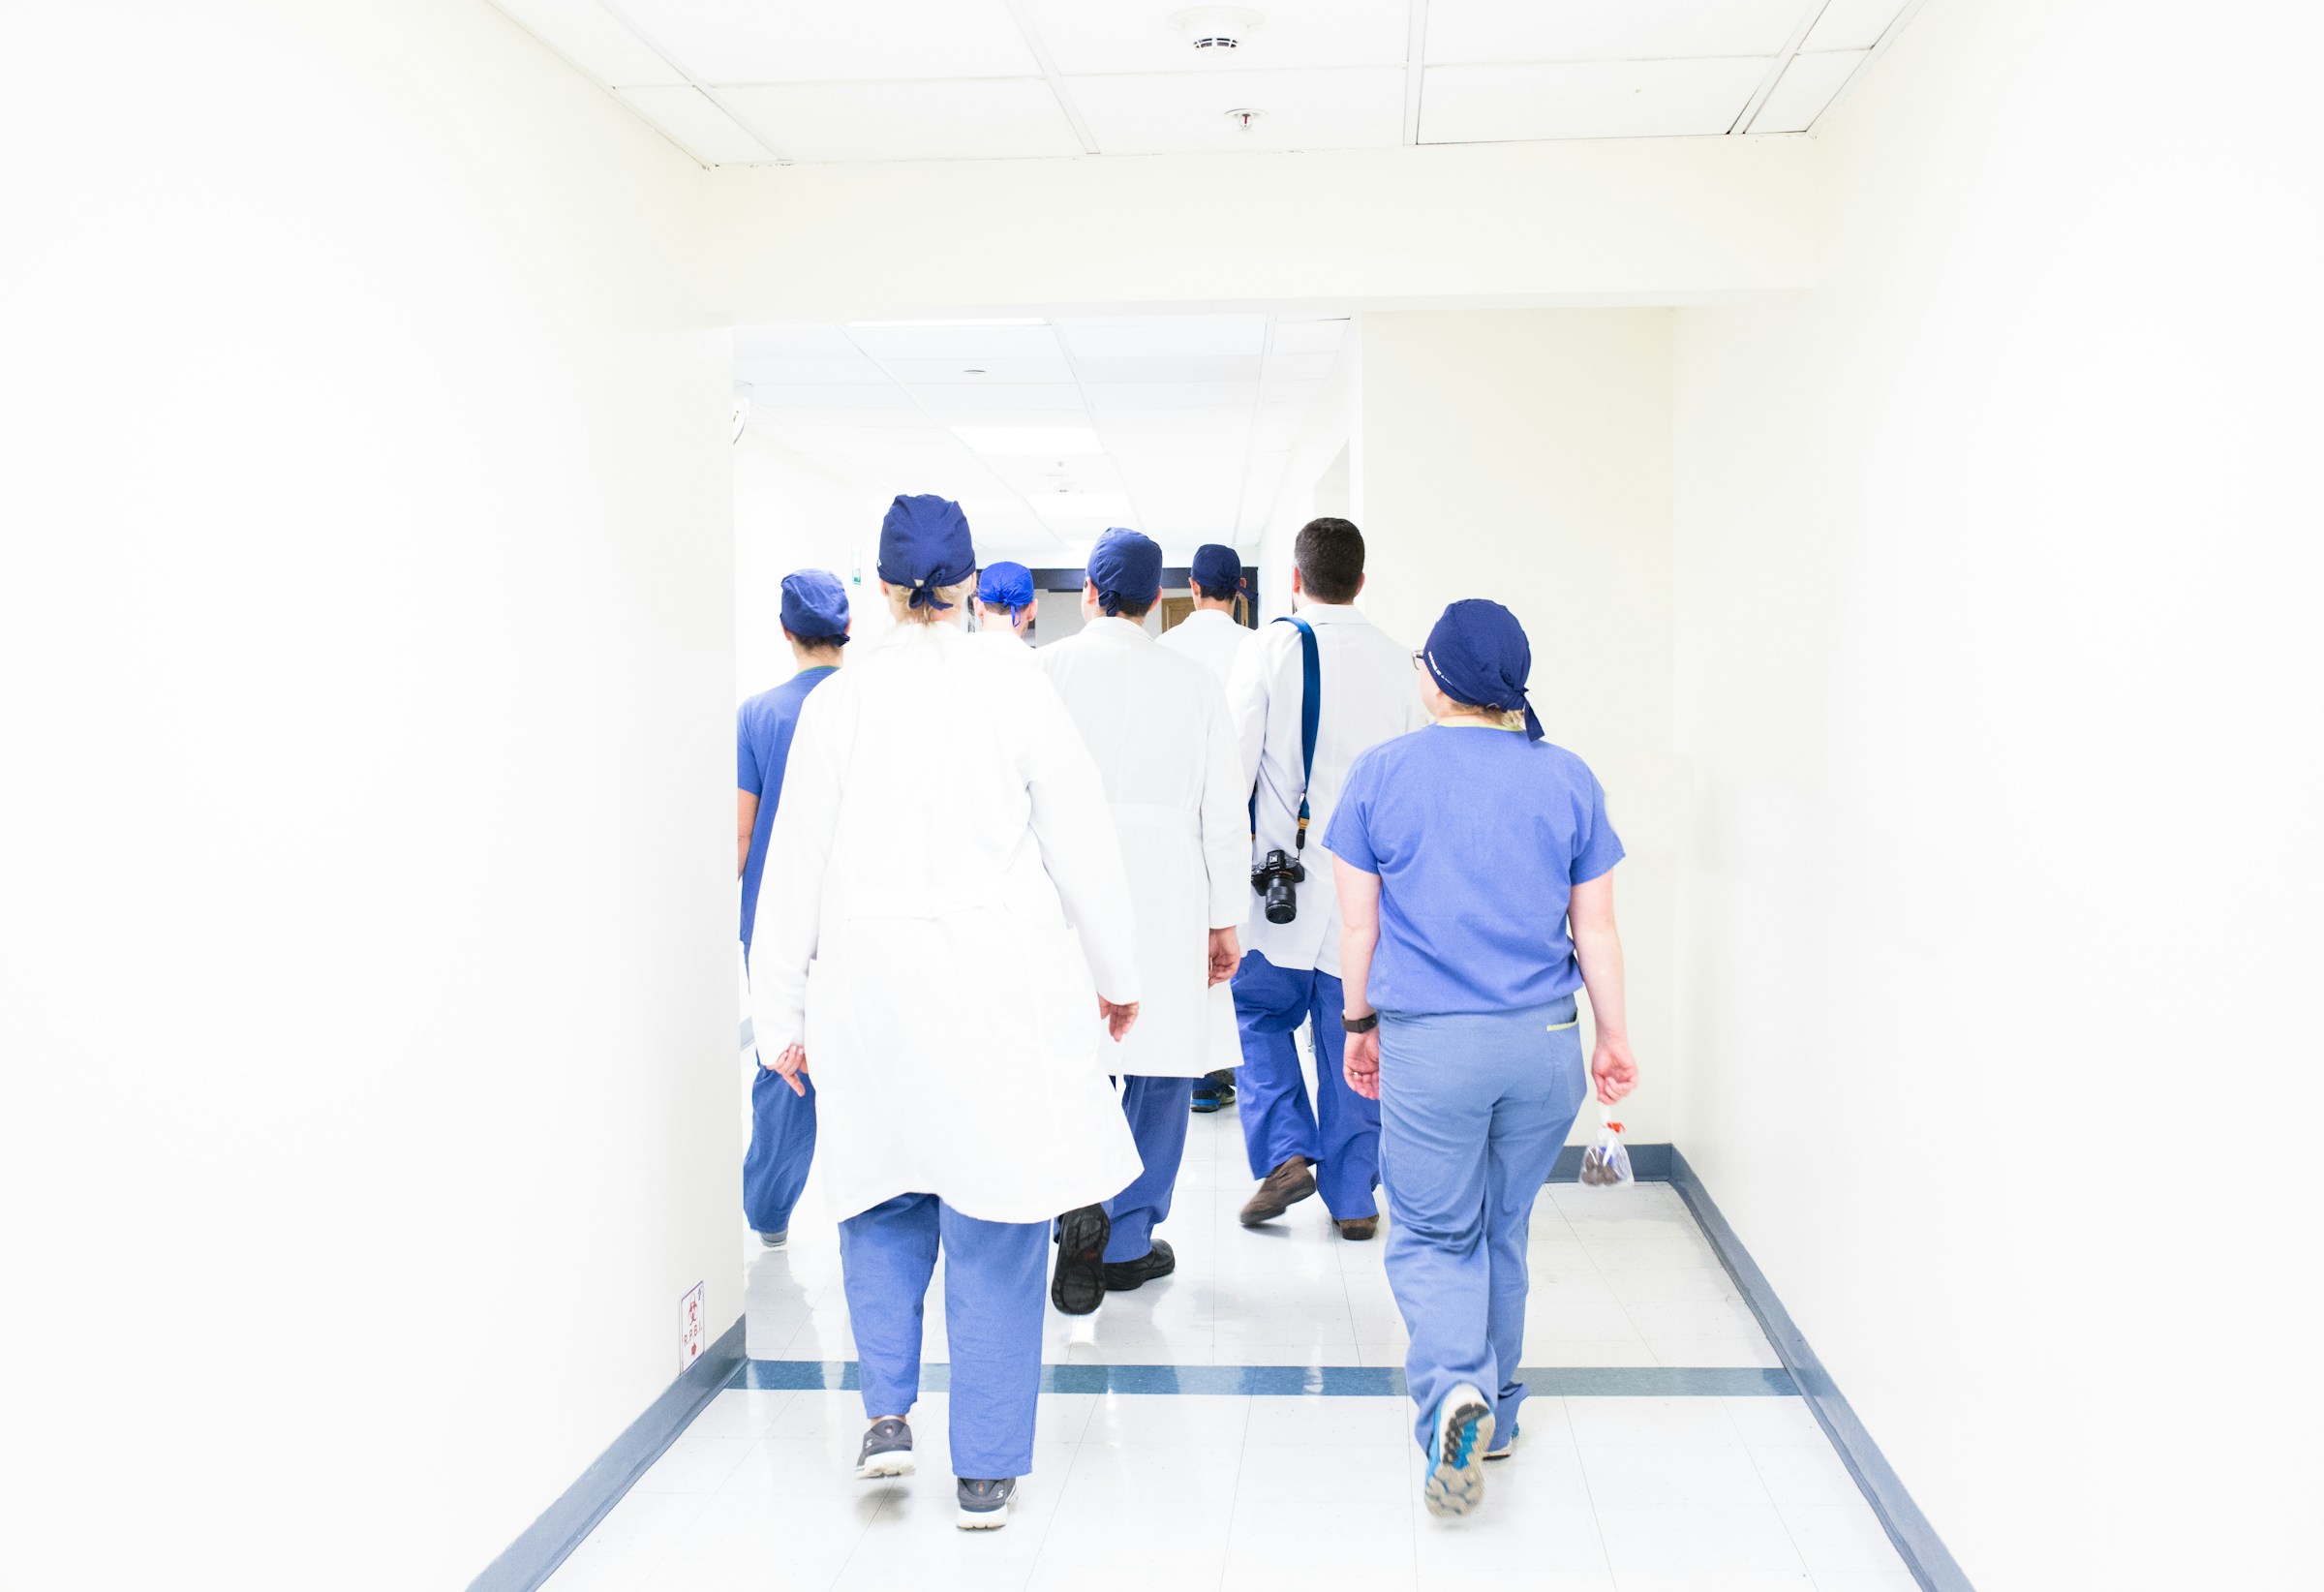 Group of medical professionals walking down a corridor